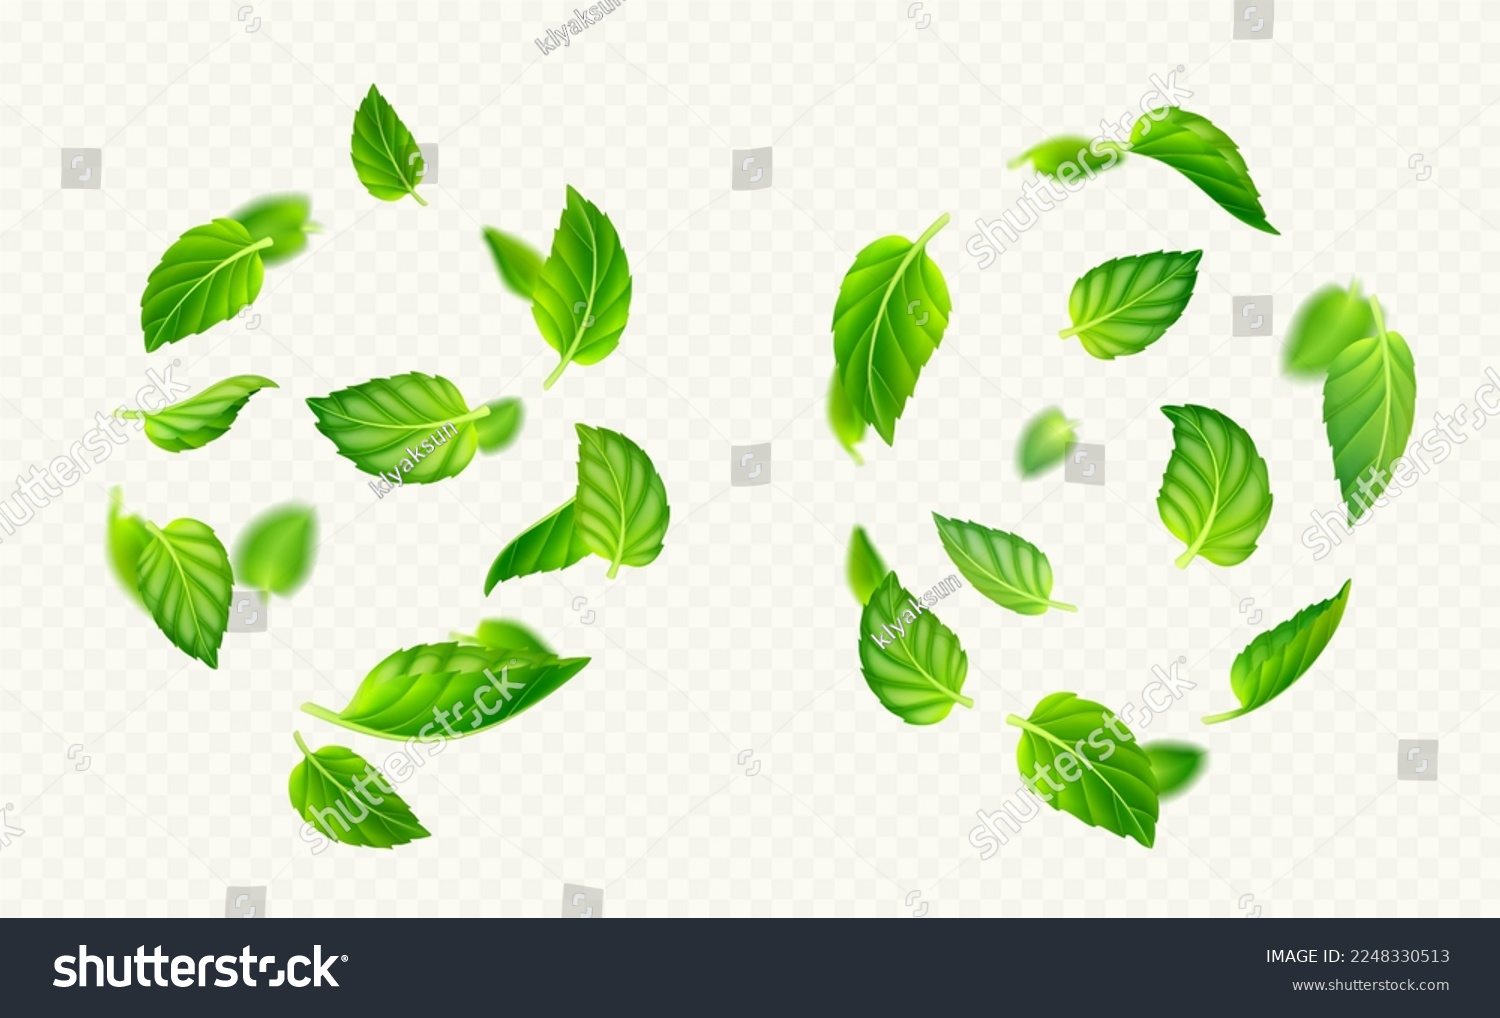 Green mint leaves falling and flying in air. Fresh summer or spring foliage of tea or peppermint, vortex of herbal leaves isolated on transparent background, vector realistic illustration #2248330513